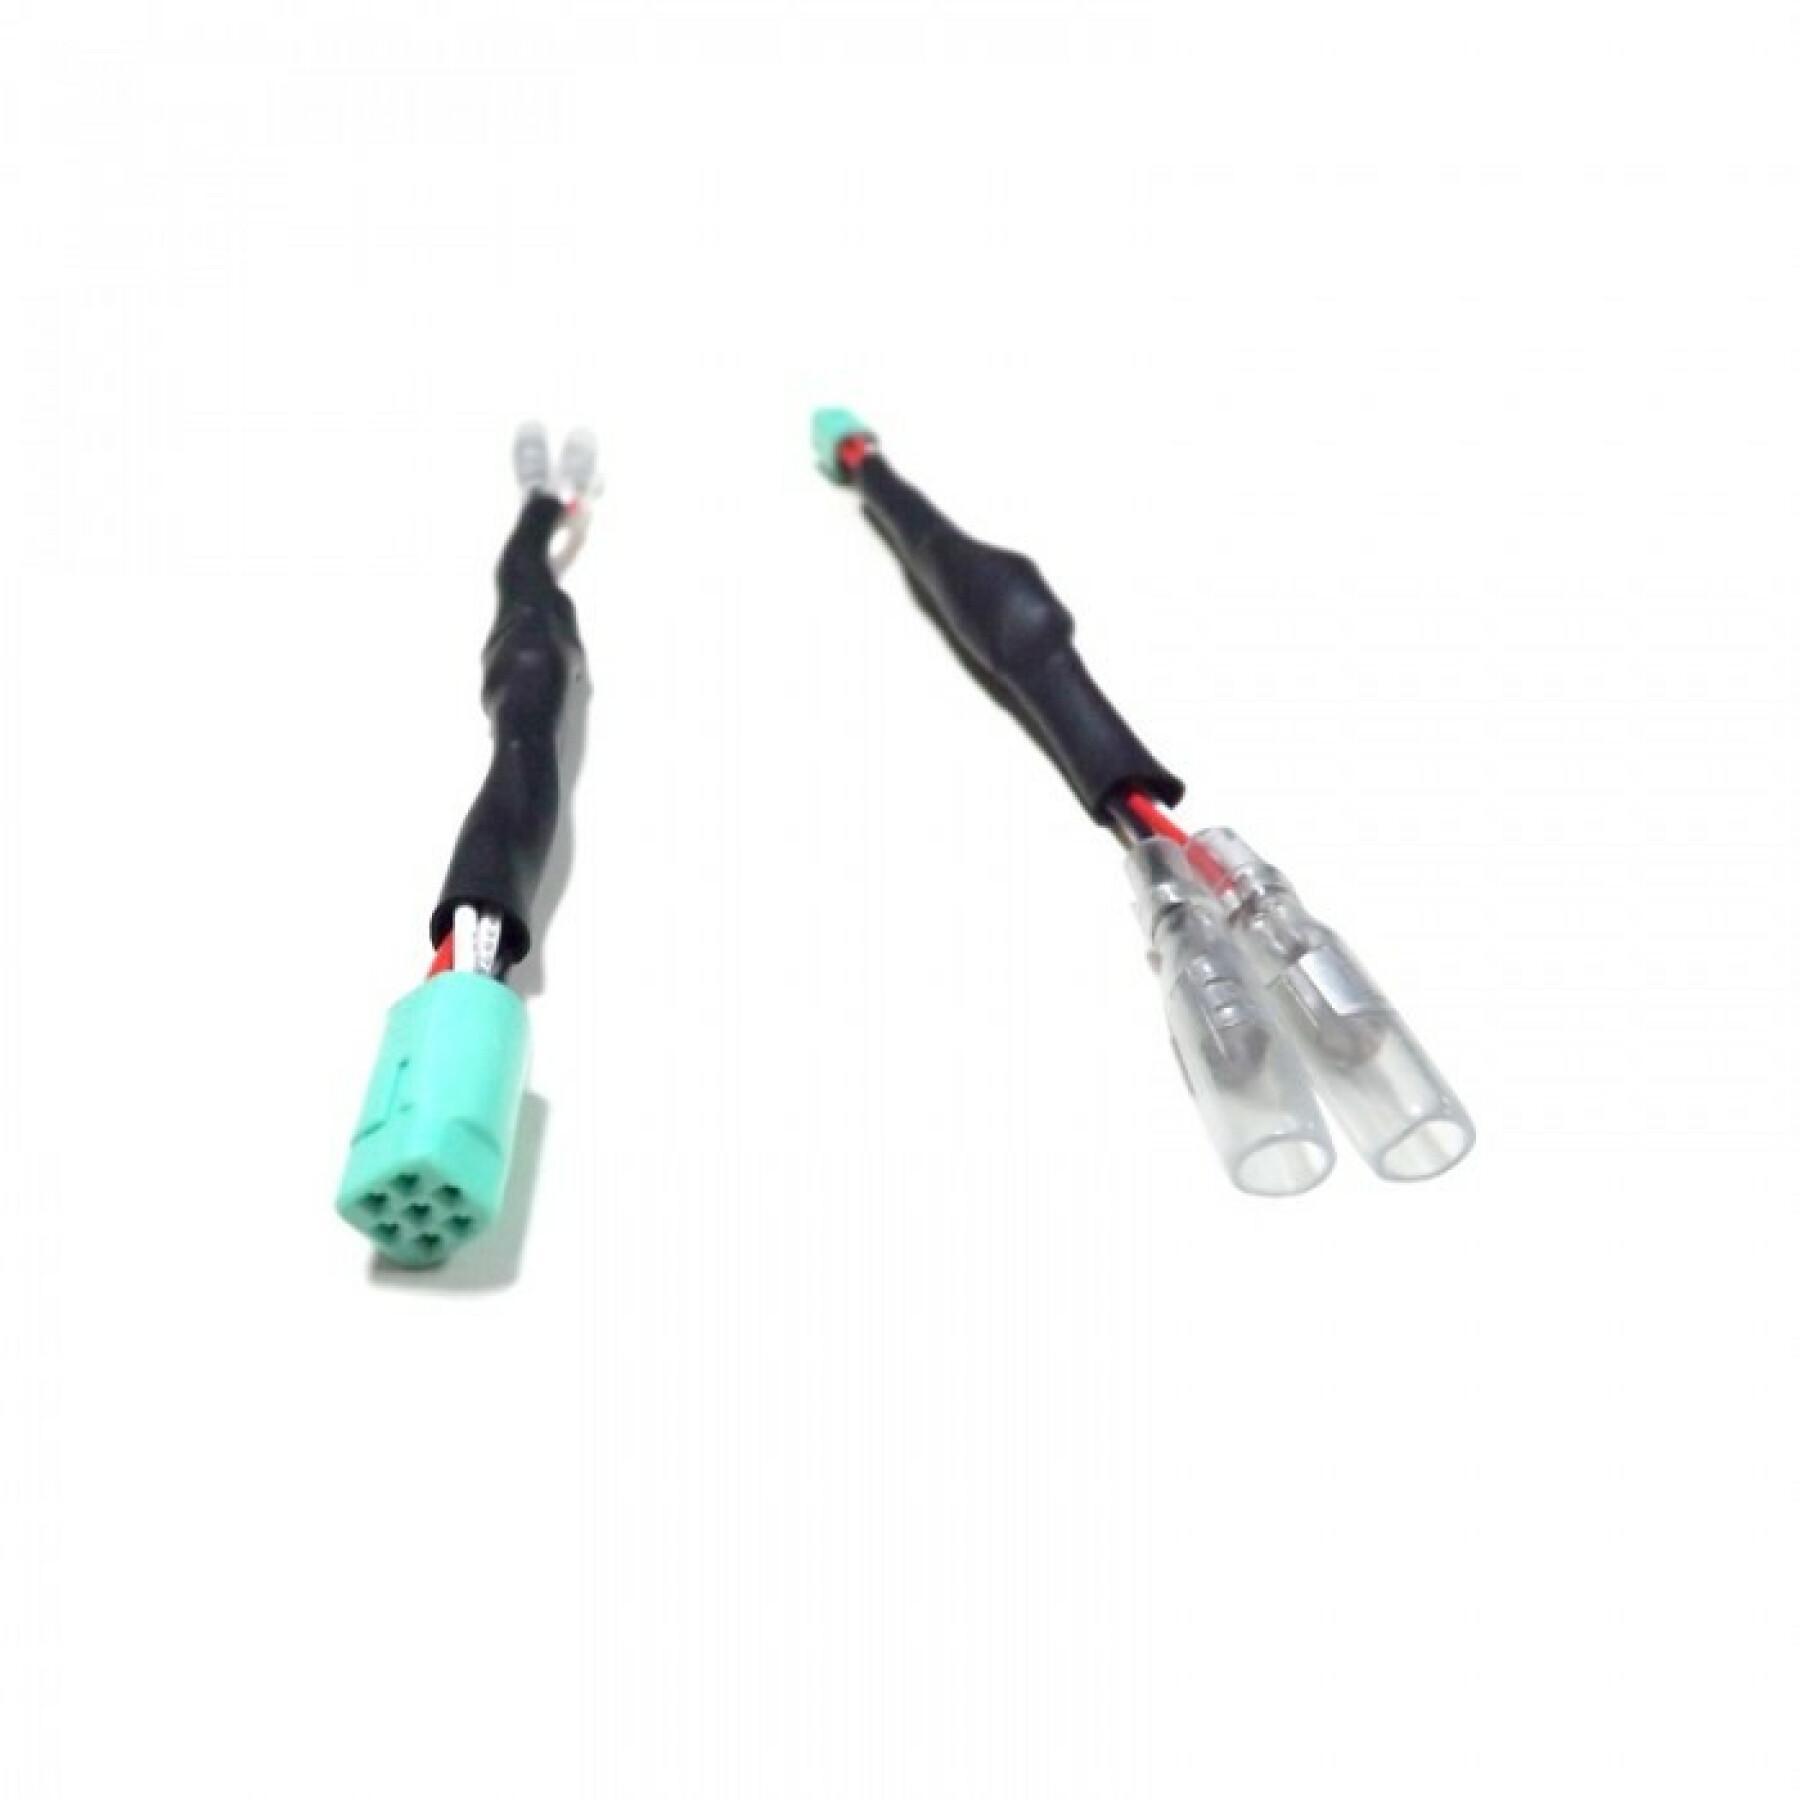 Pair of 7-pin connectors Chaft